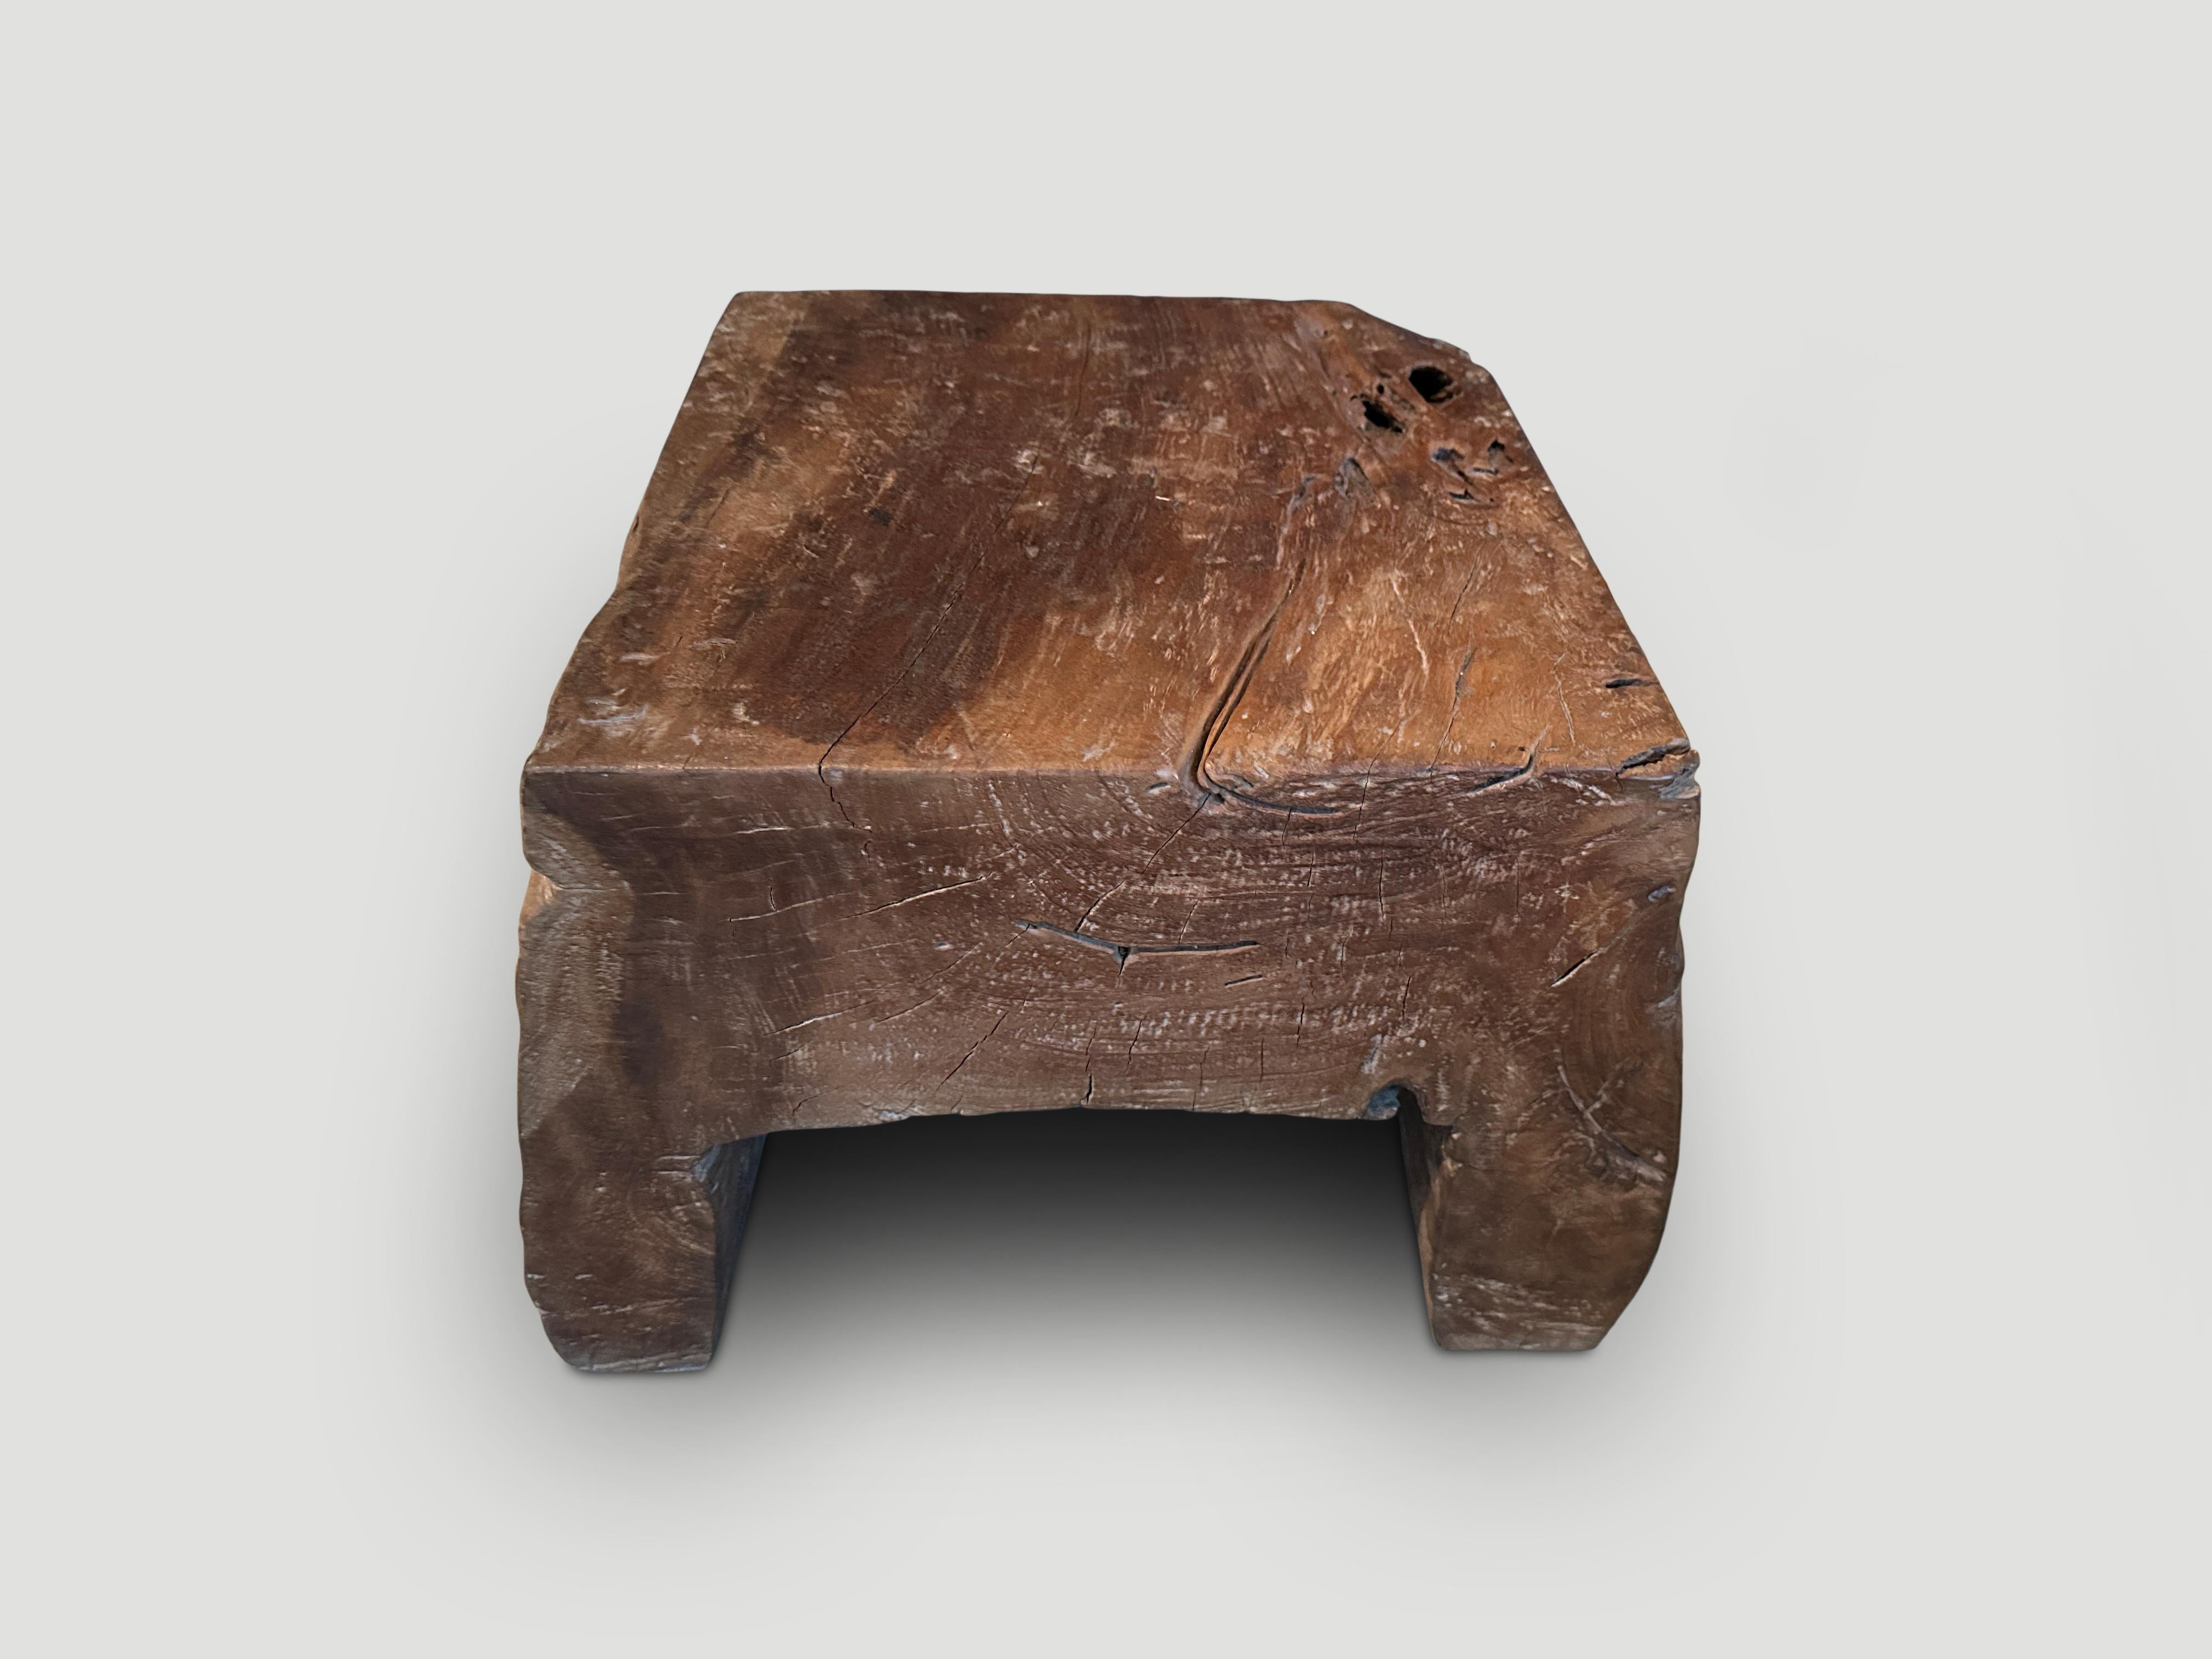 Beautiful side table or stool hand carved from a single block of wood. The top is 15 x 14 x 13